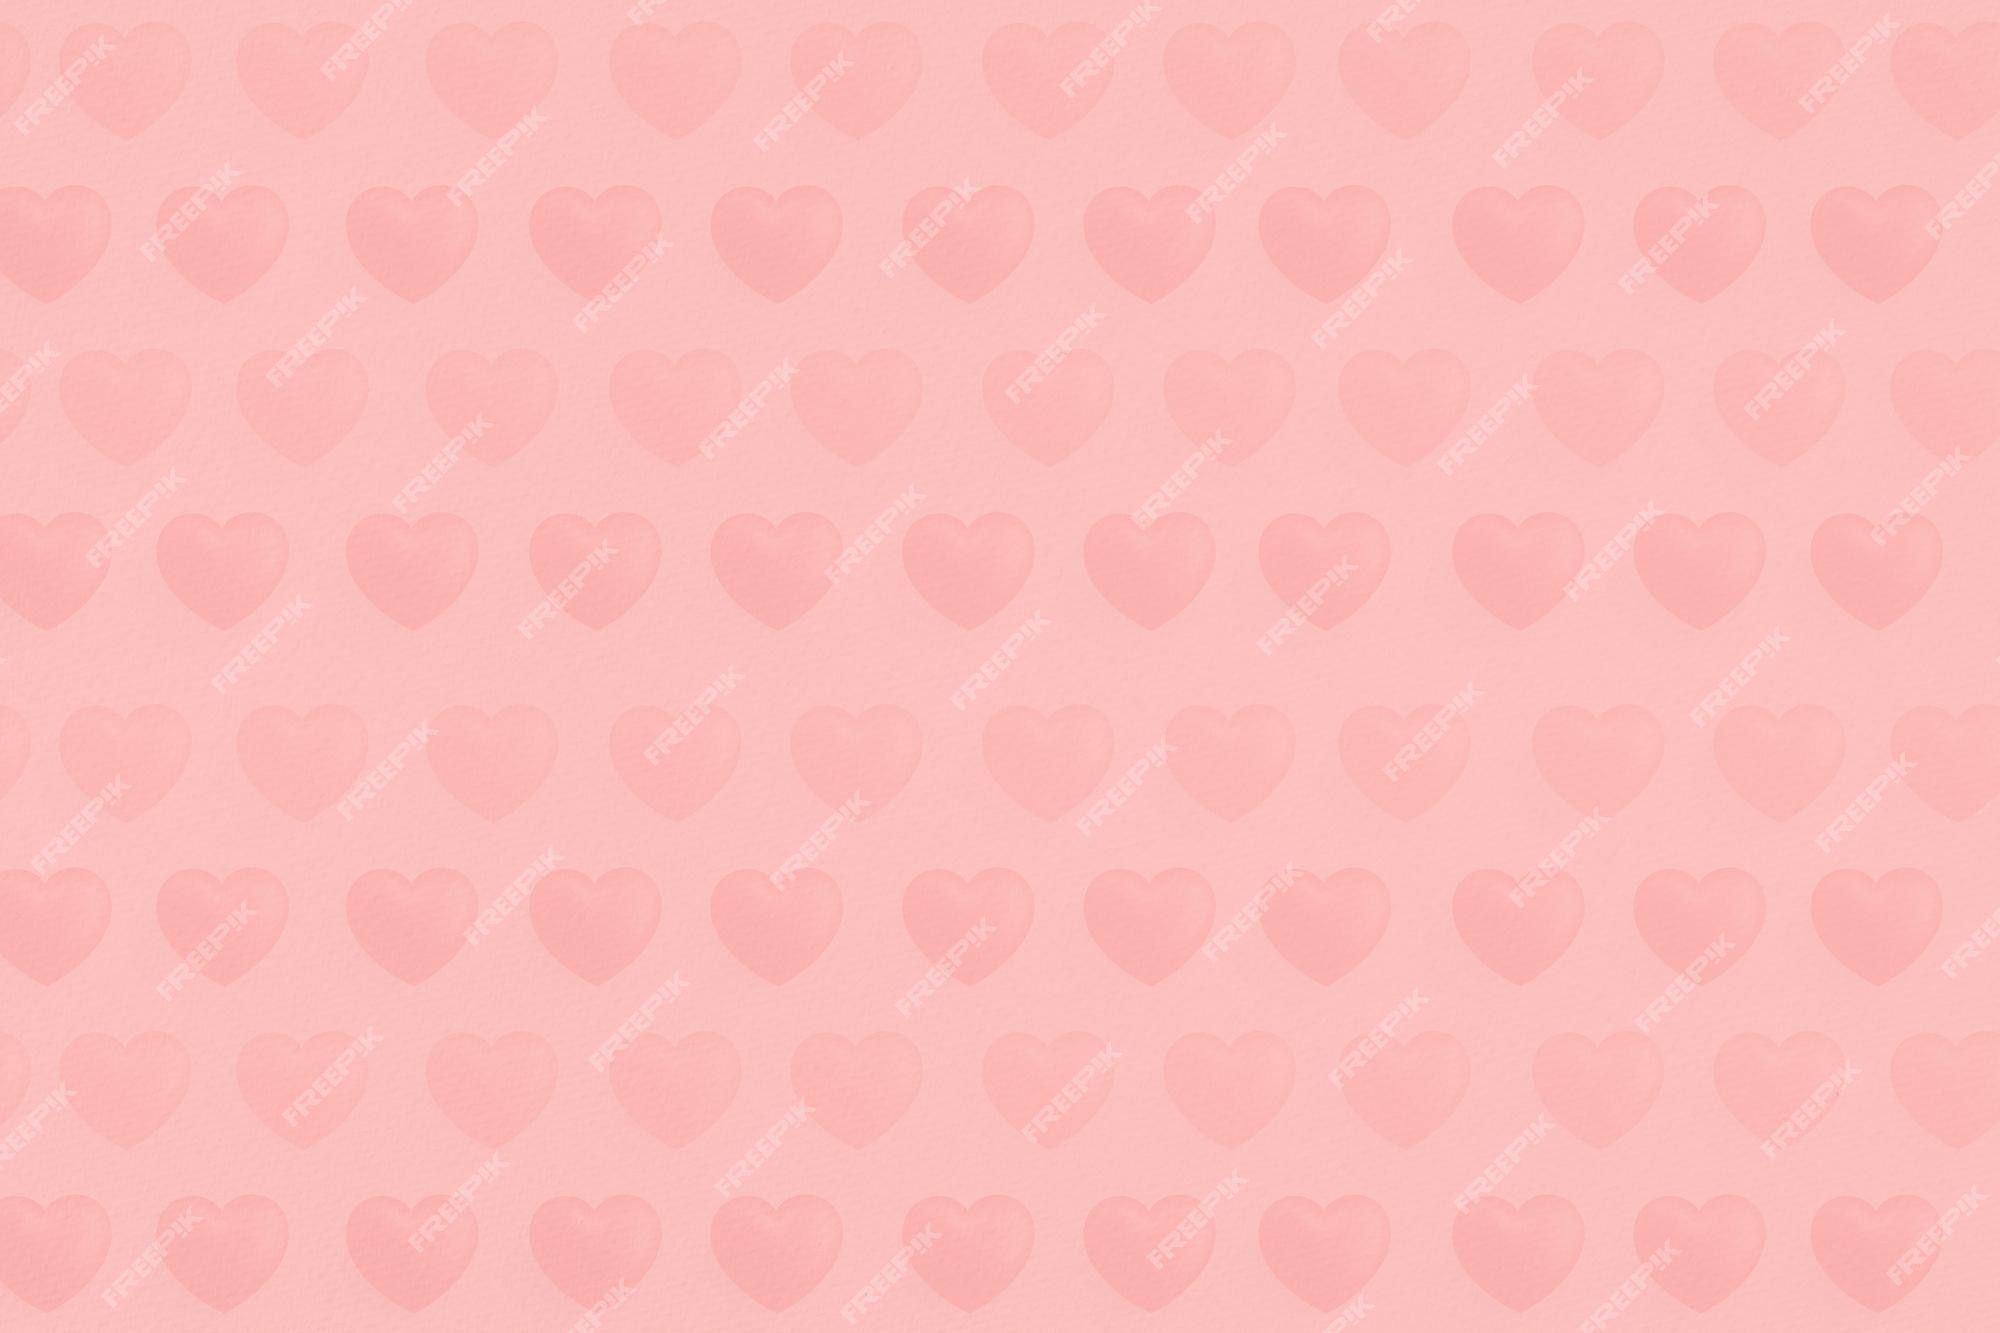 Premium Photo. Heart love romantic valentine wallpaper, sweet pink wrapping paper texture, pink gradient background